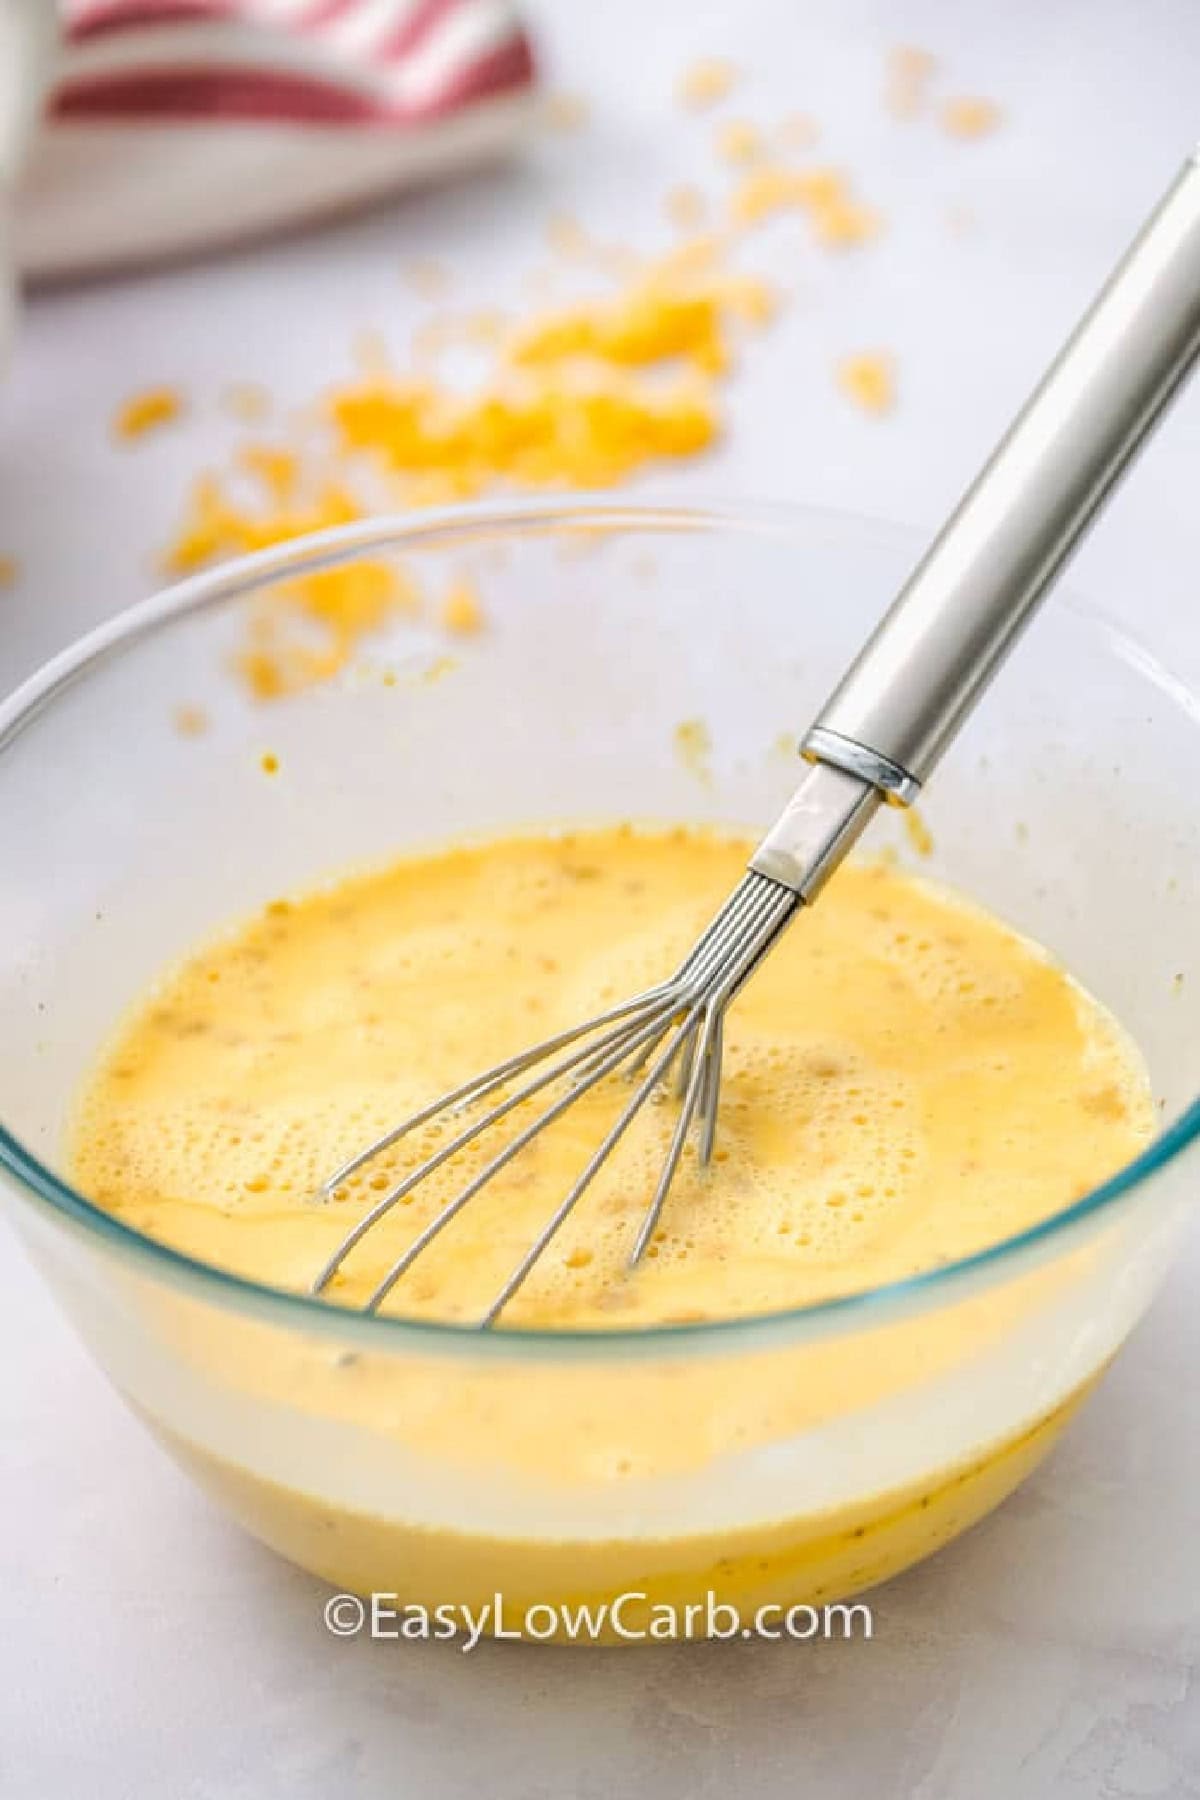 whisked egg mixture in a bowl to make Crustless Ham and Cheese Quiche